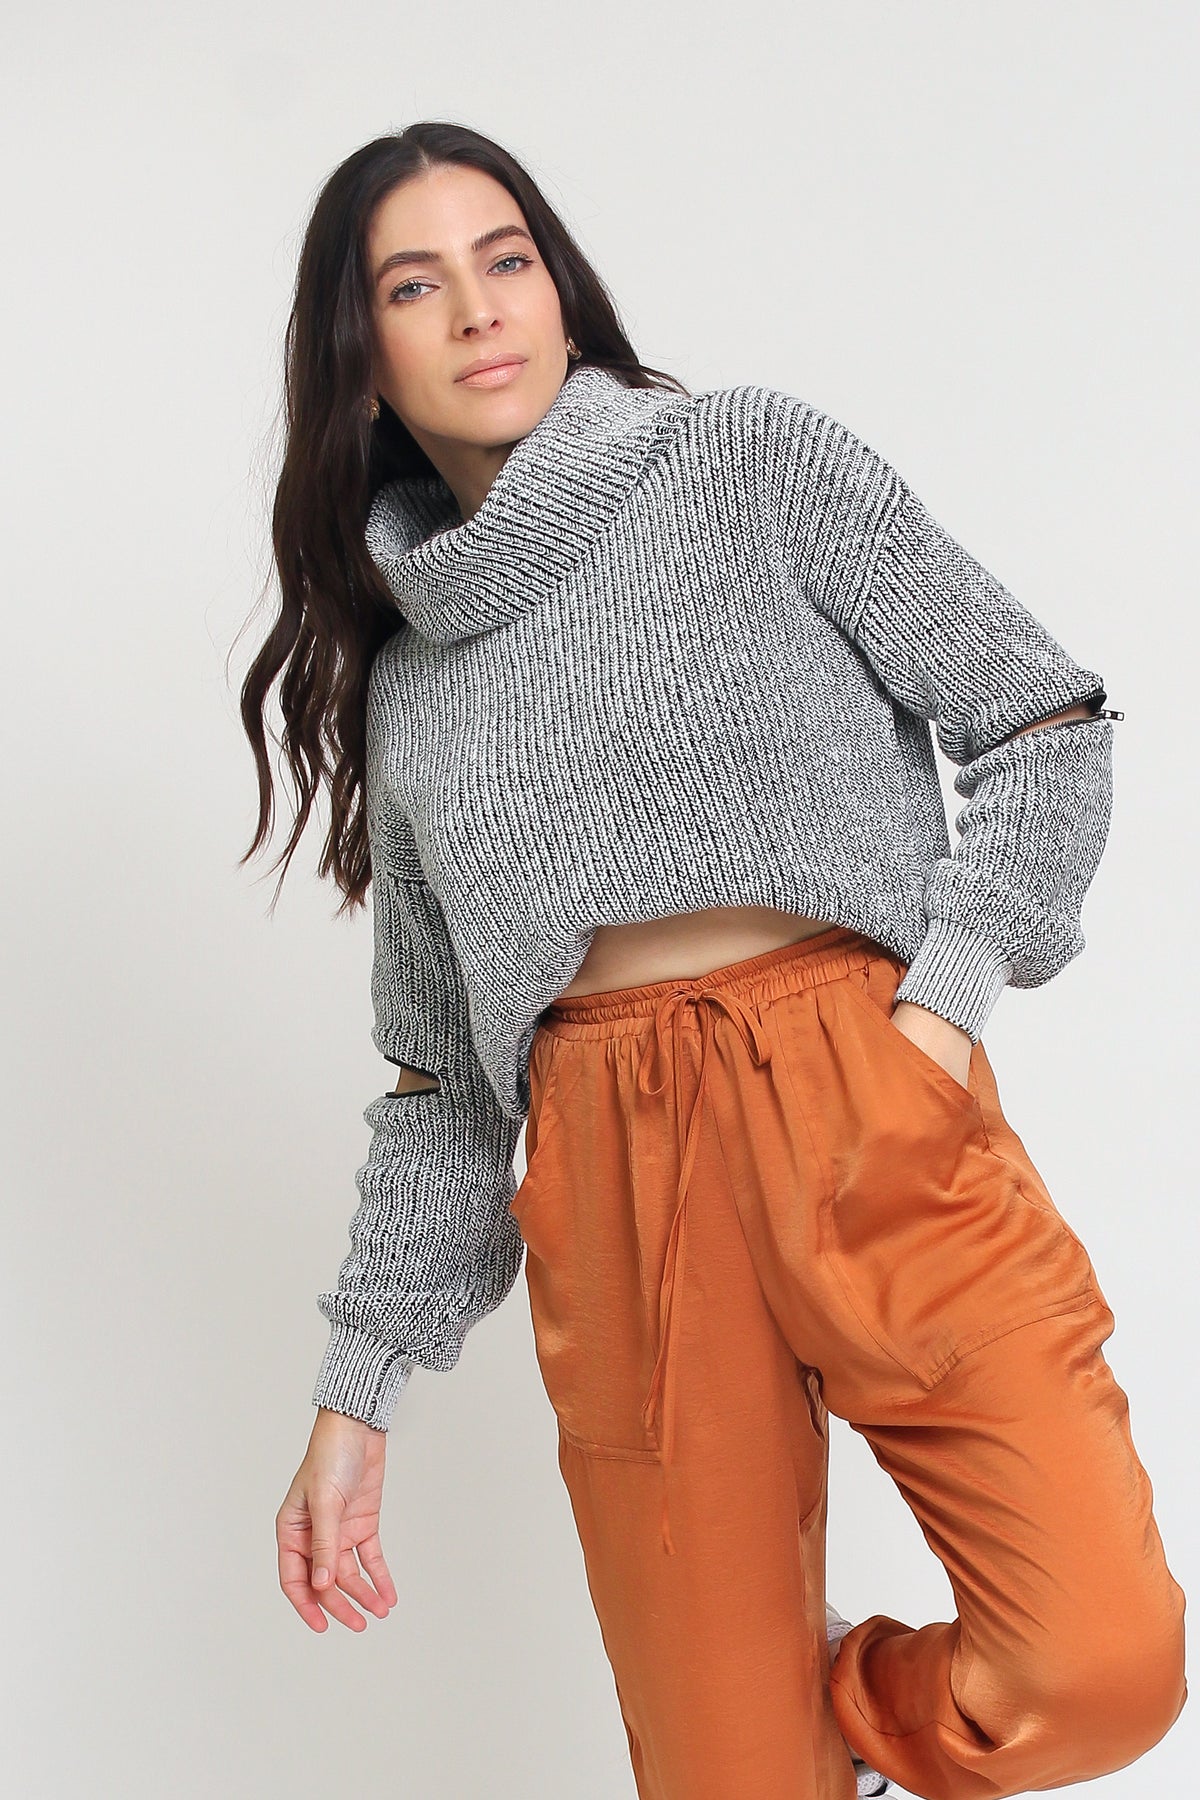 Chunky turtleneck sweater with zipper sleeves, in black/grey. Image 2